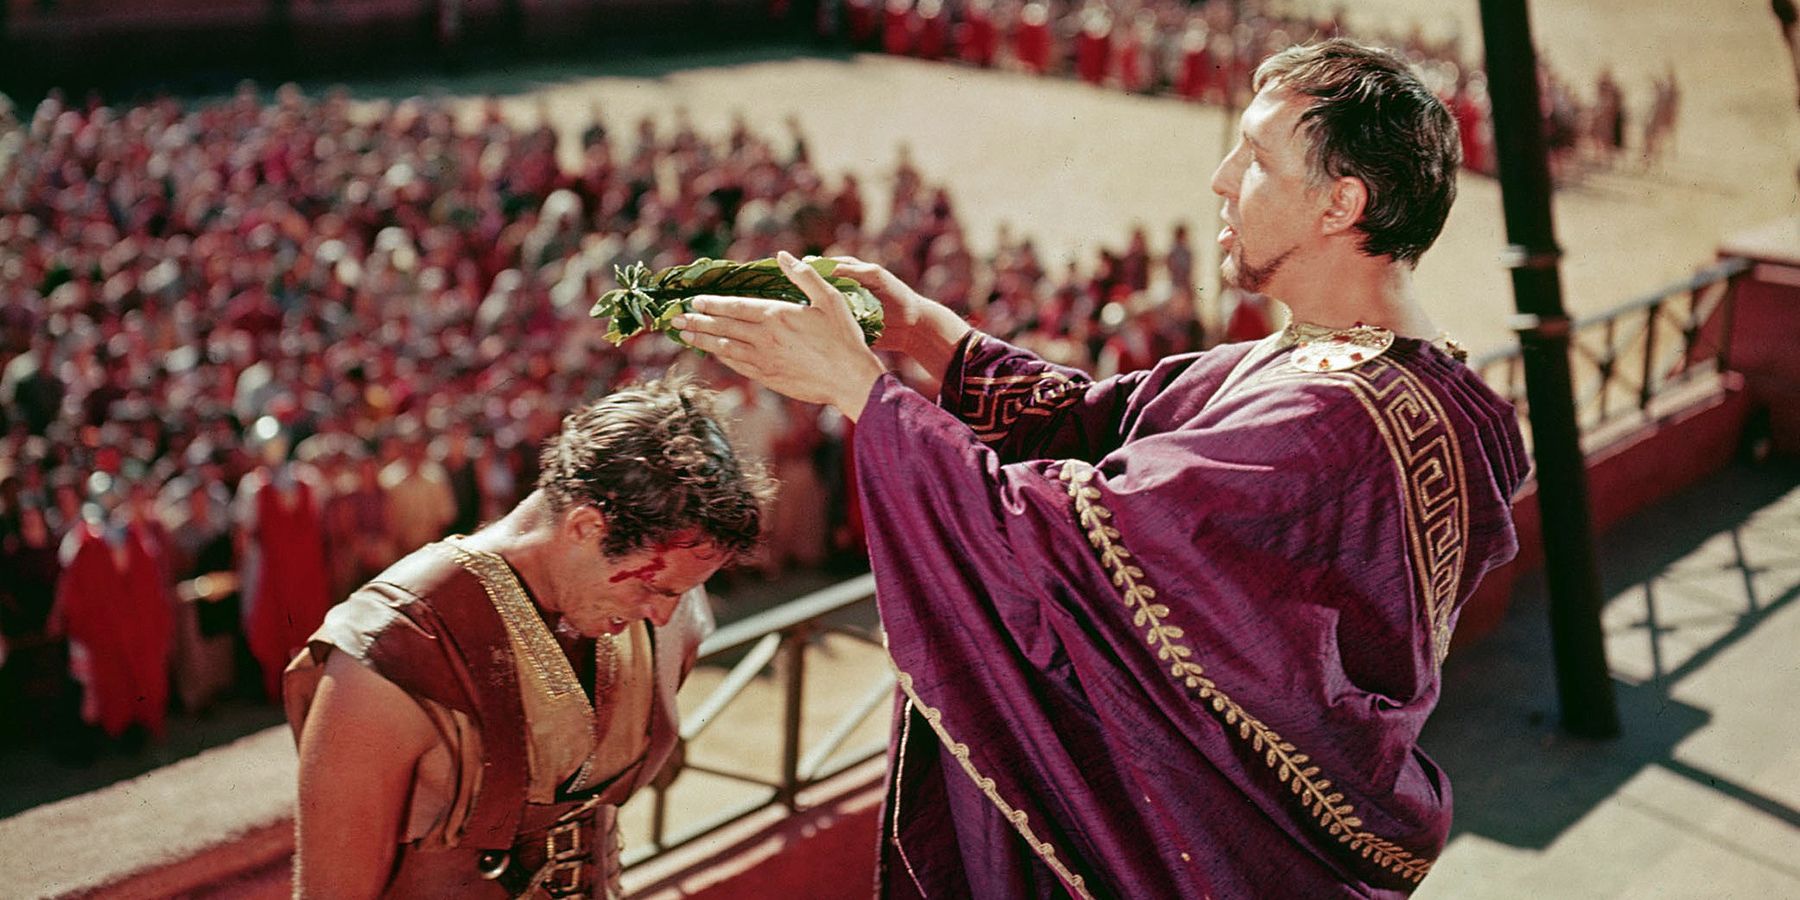 Ben-Hur being crowned in the 1959 remake